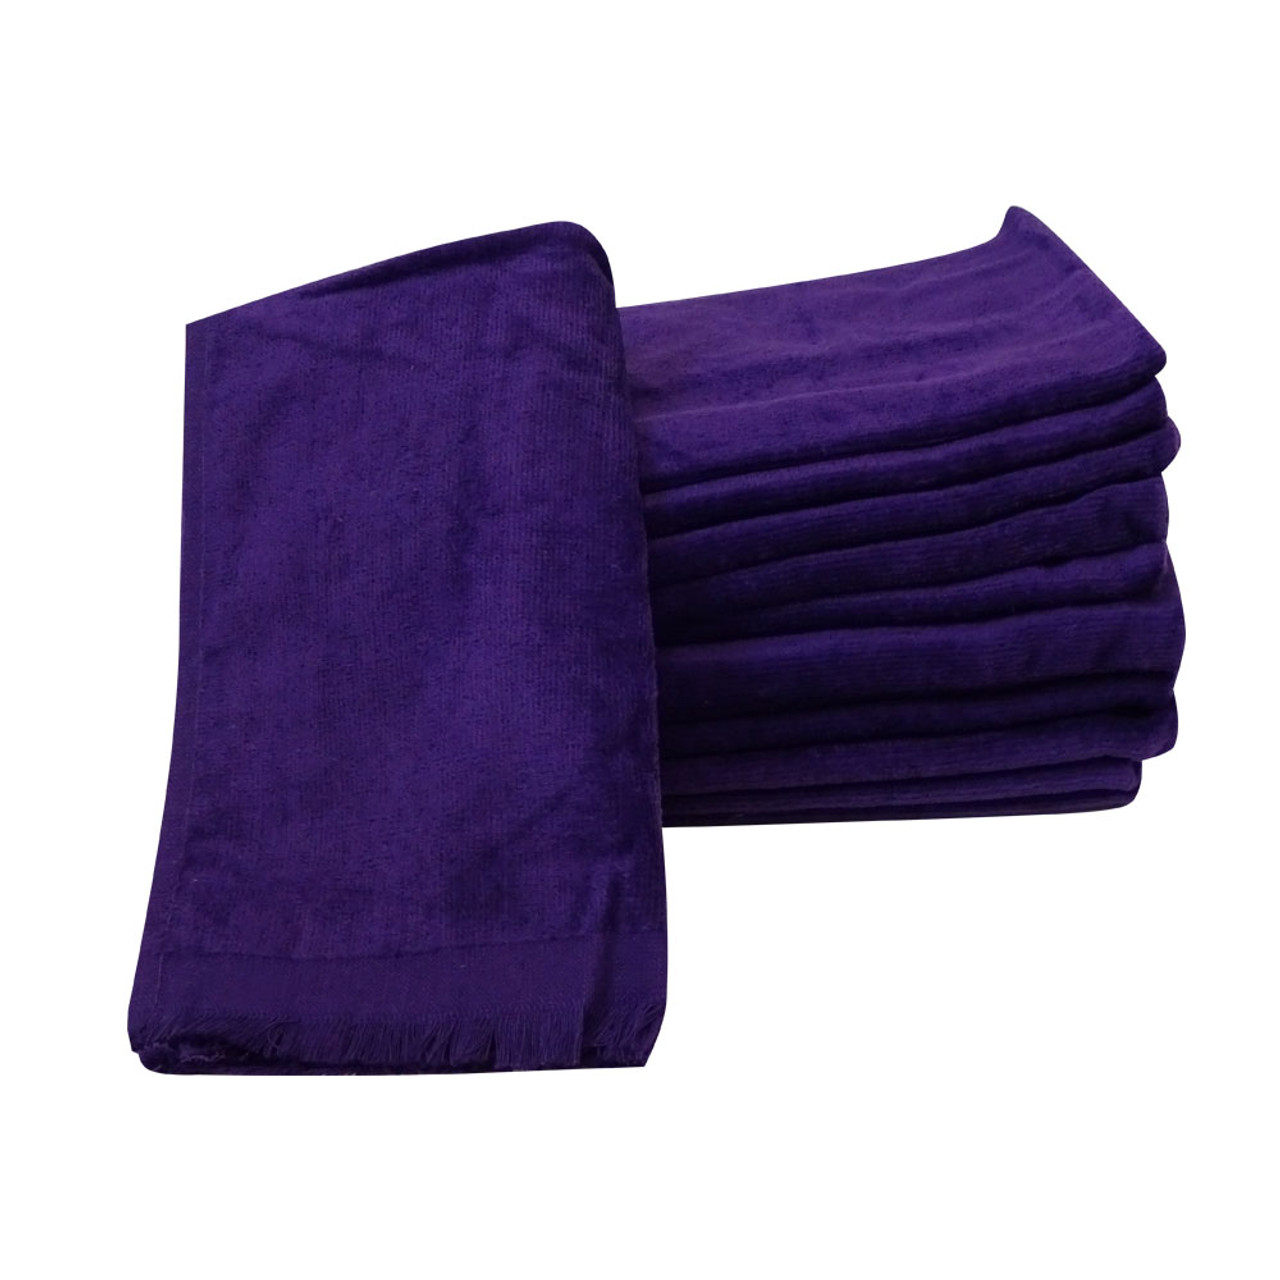 Wholesale Towels > 11x18 - BURGUNDY Rally Towels with Fringed Ends (Copy)